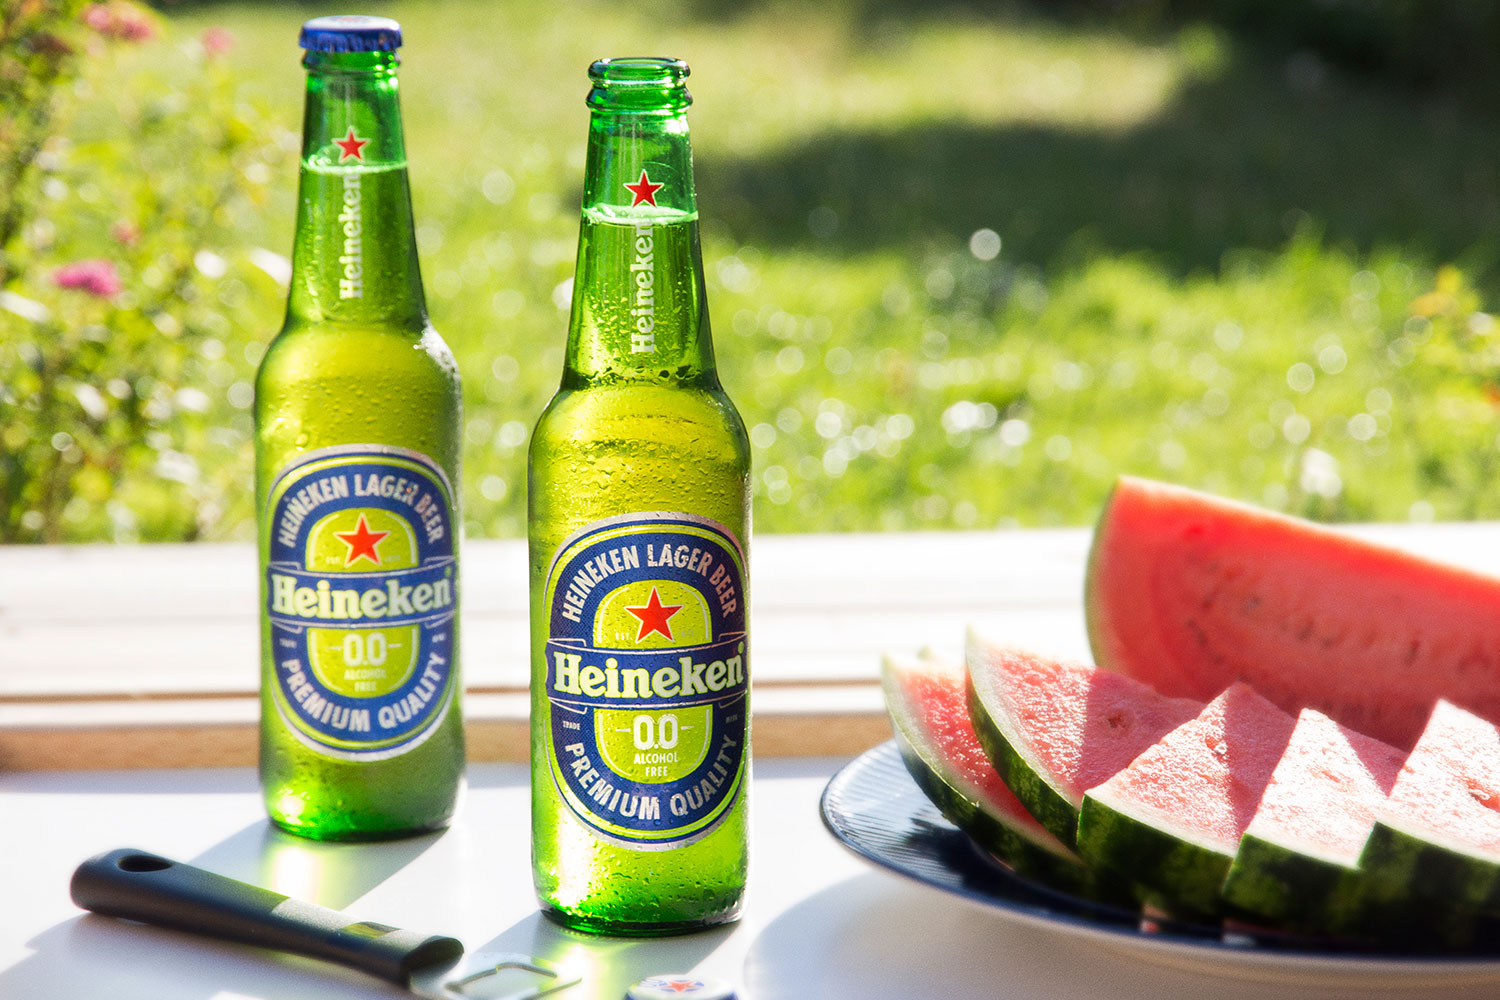 Heineken® 0.0: Great taste, all natural, only 69 calories and zero Alcohol